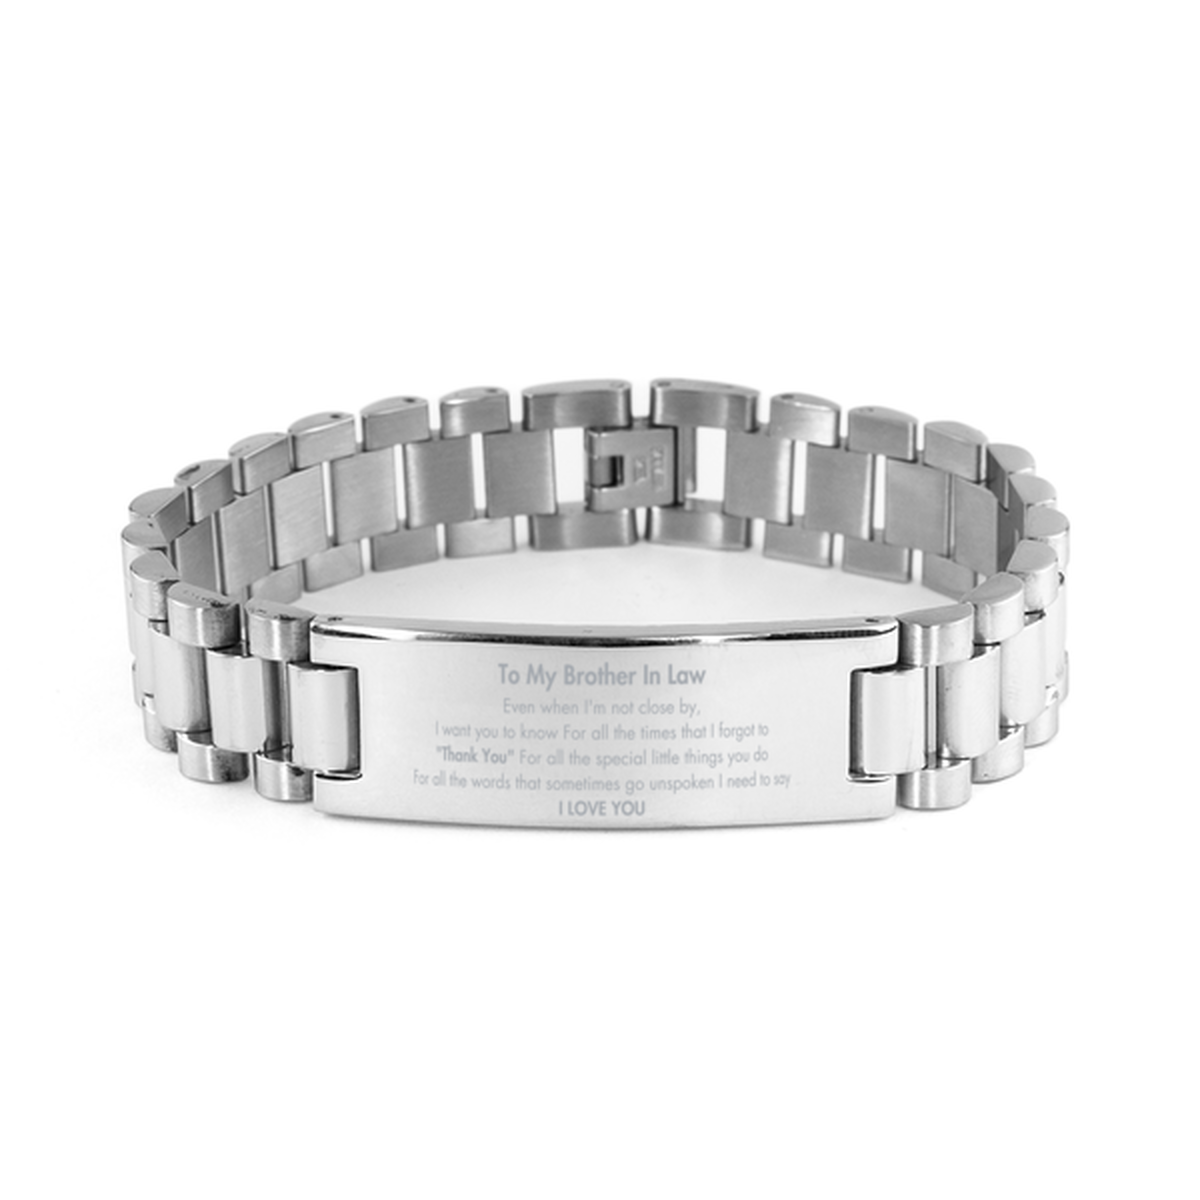 Thank You Gifts for Brother In Law, Keepsake Ladder Stainless Steel Bracelet Gifts for Brother In Law Birthday Mother's day Father's Day Brother In Law For all the words That sometimes go unspoken I need to say I LOVE YOU